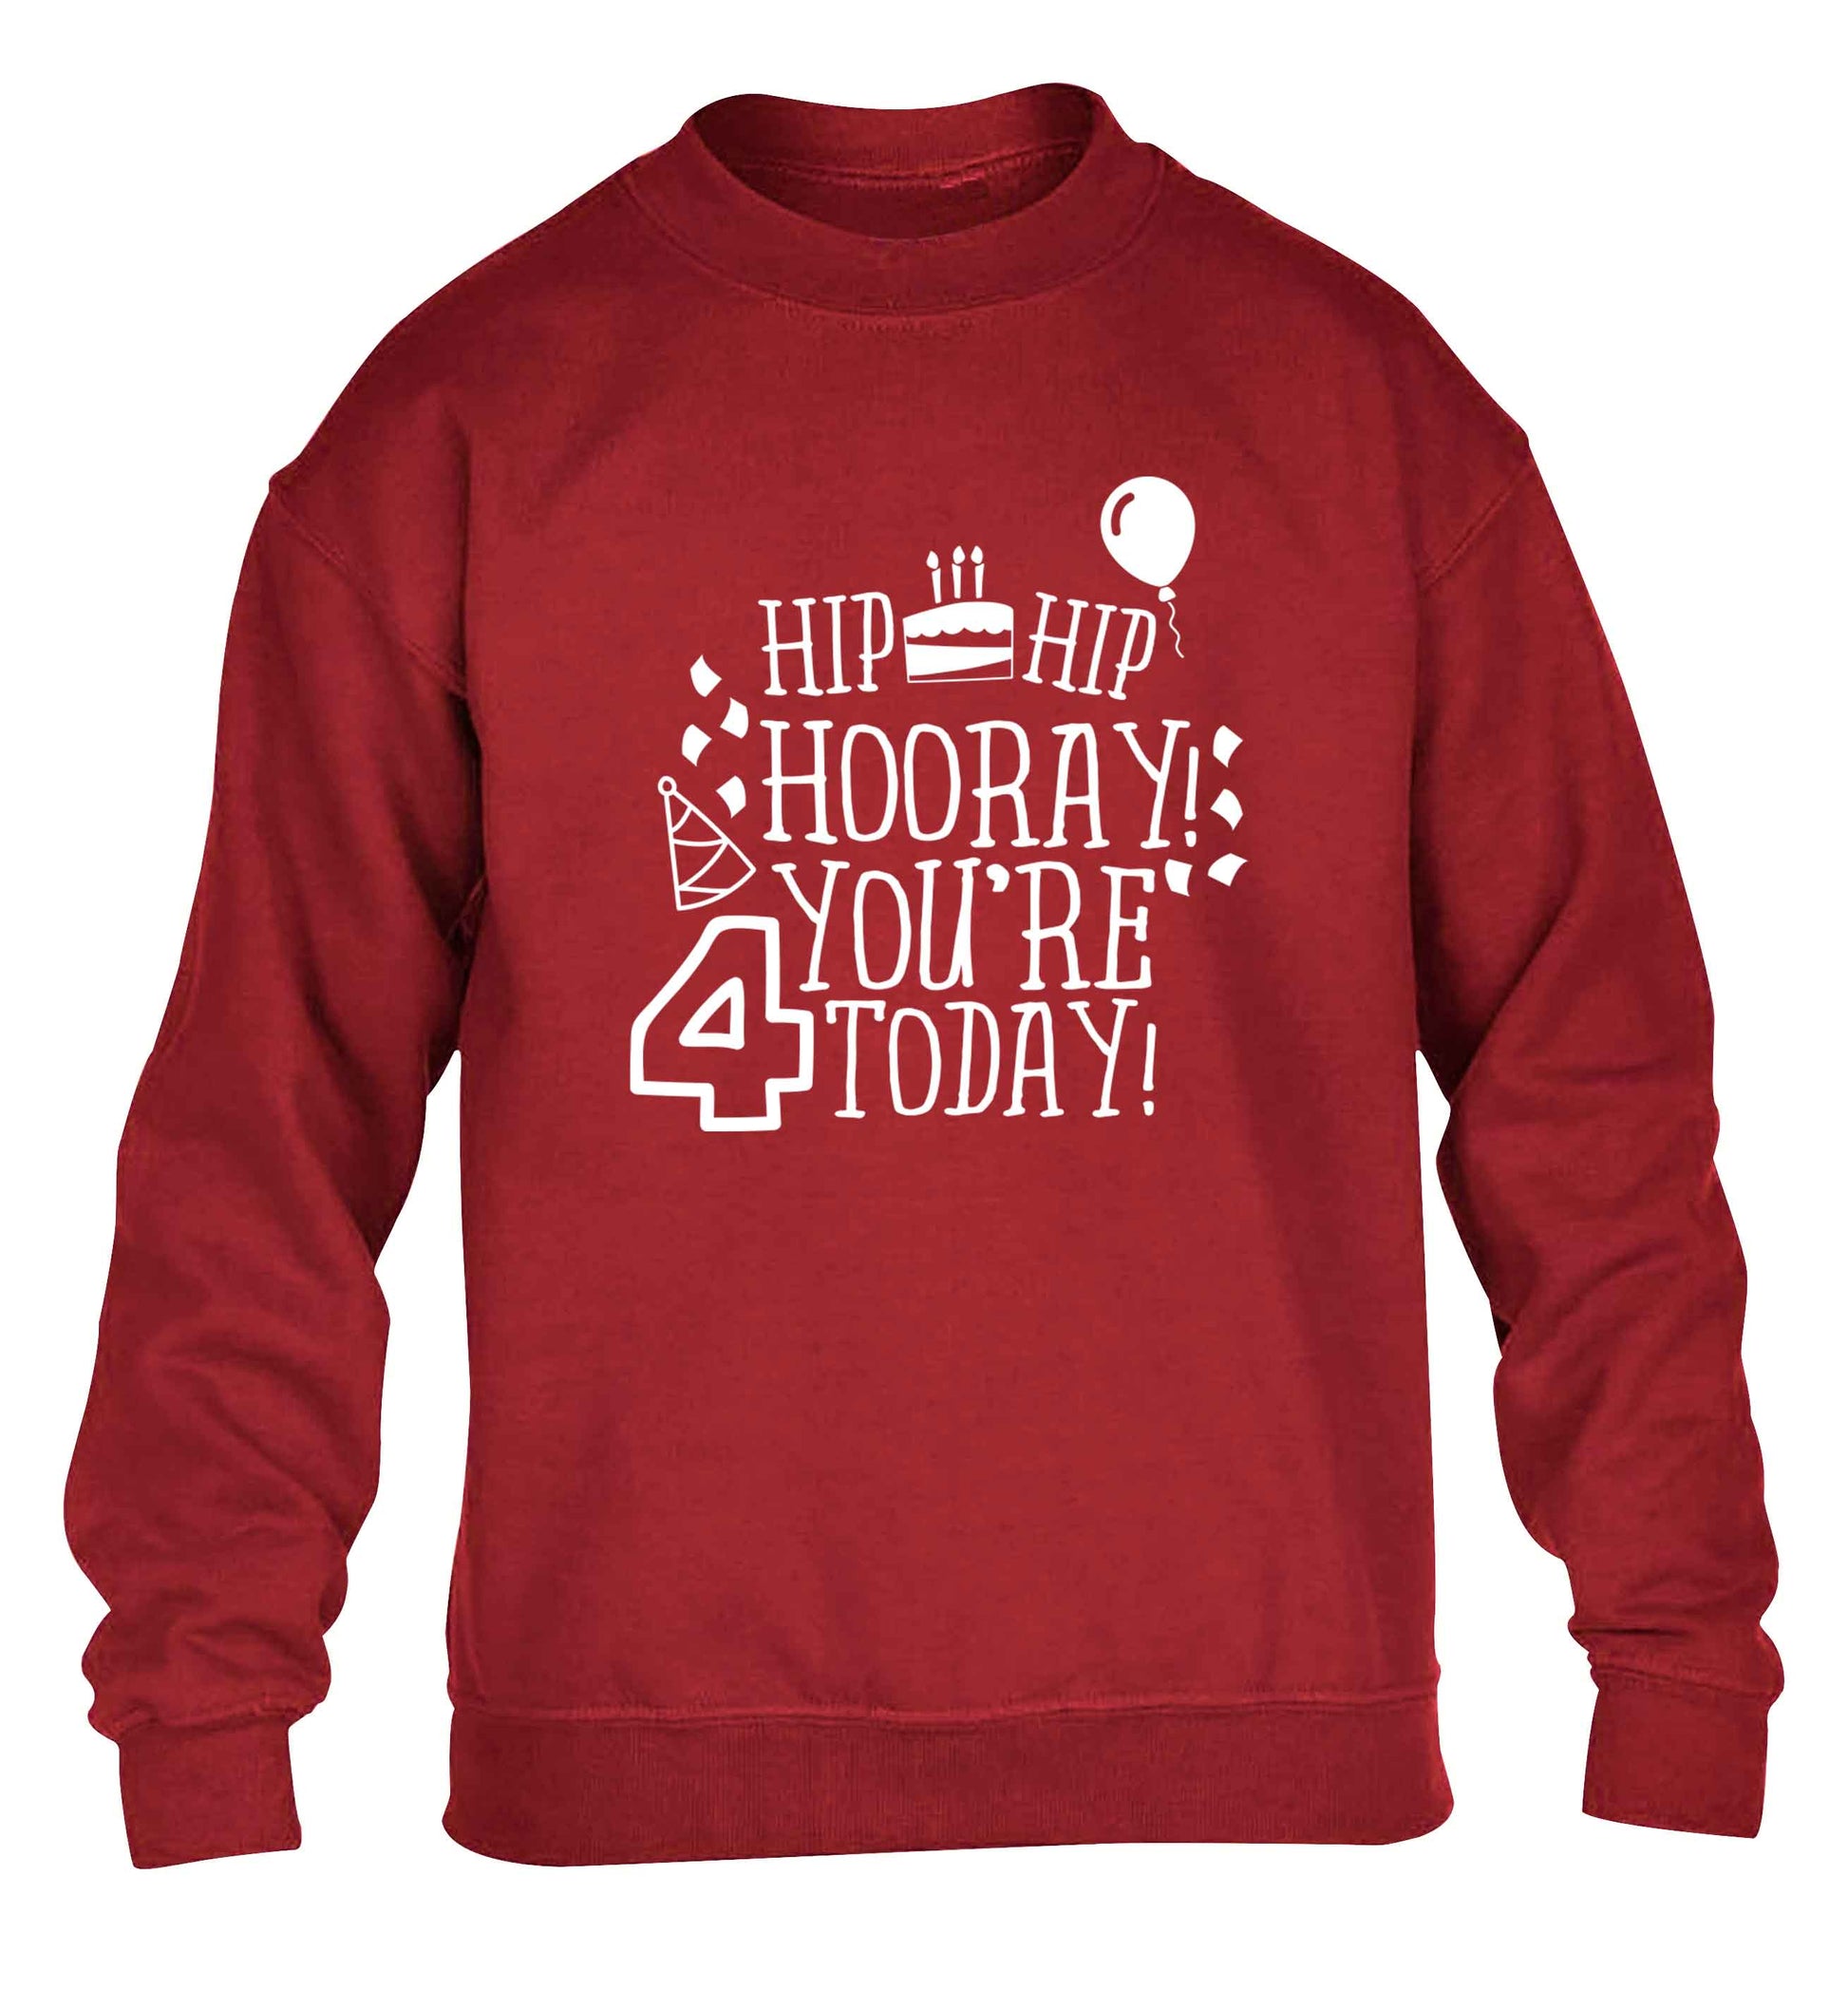 Hip hip hooray you're four today!children's grey sweater 12-13 Years